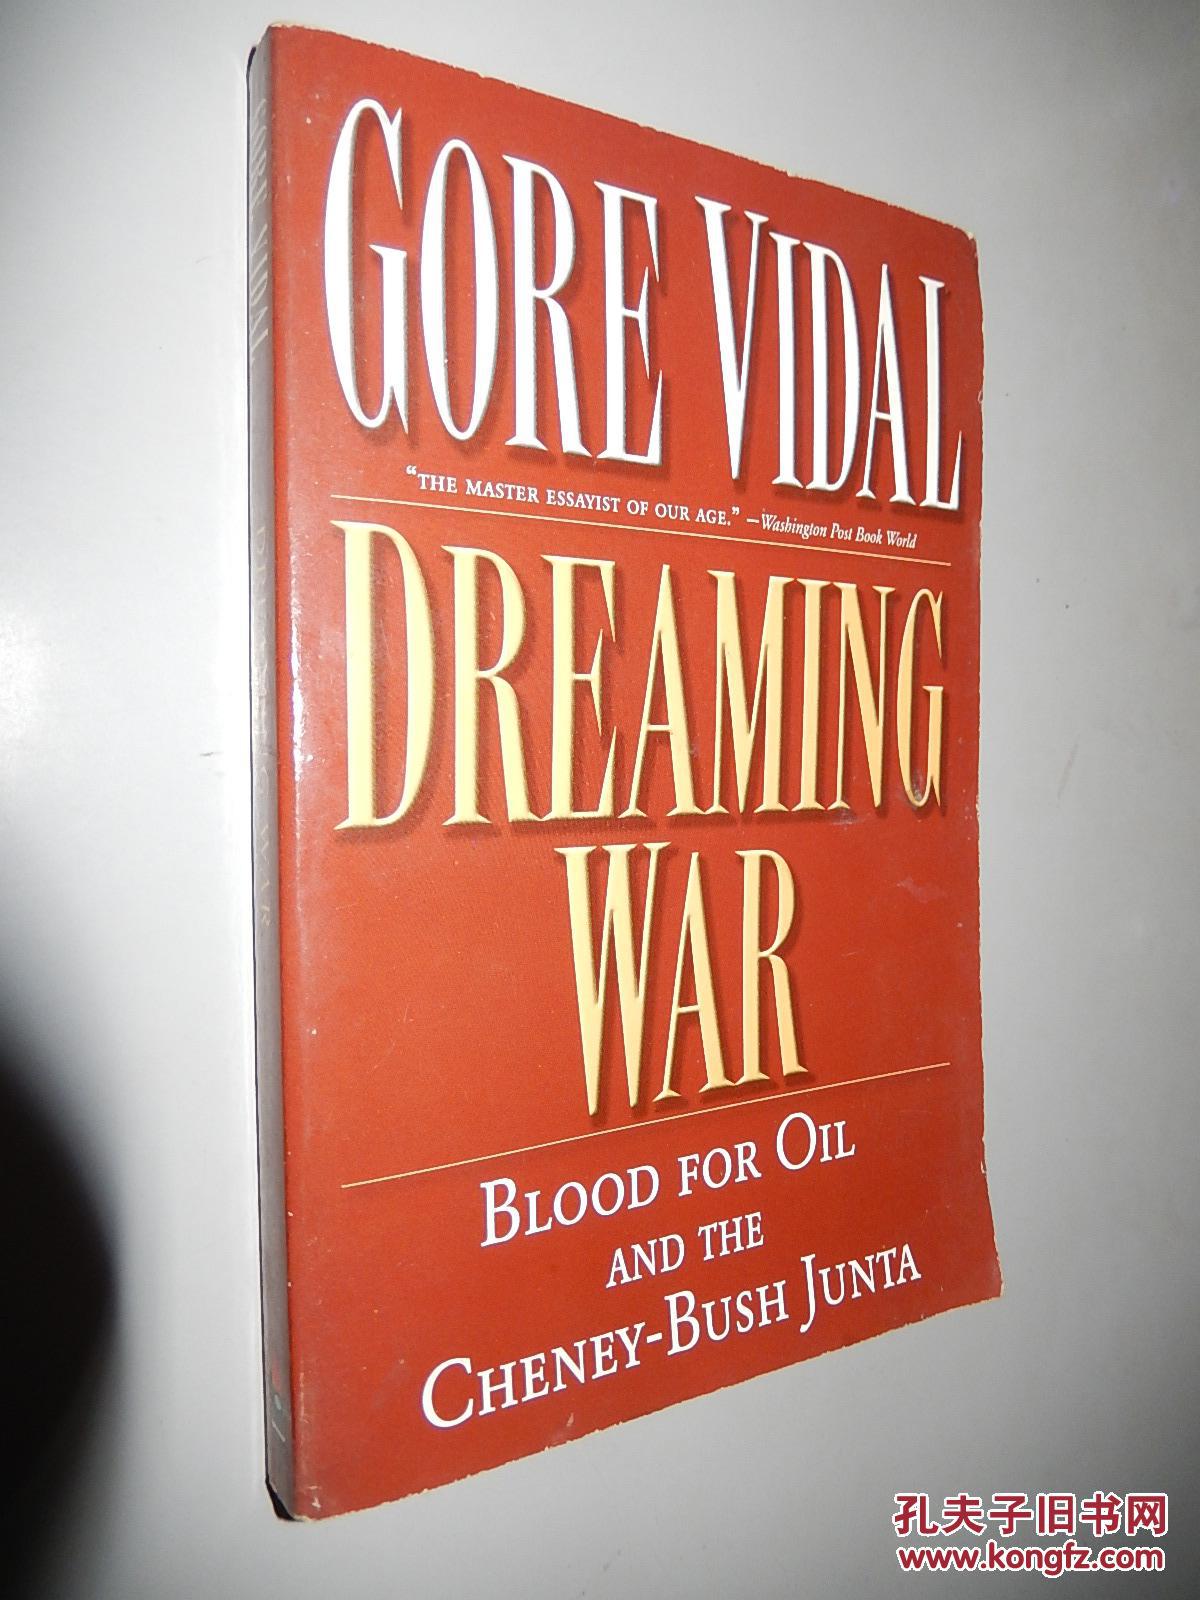 Dreaming War: Blood for Oil and the Cheney-Bush Junta 英文原版